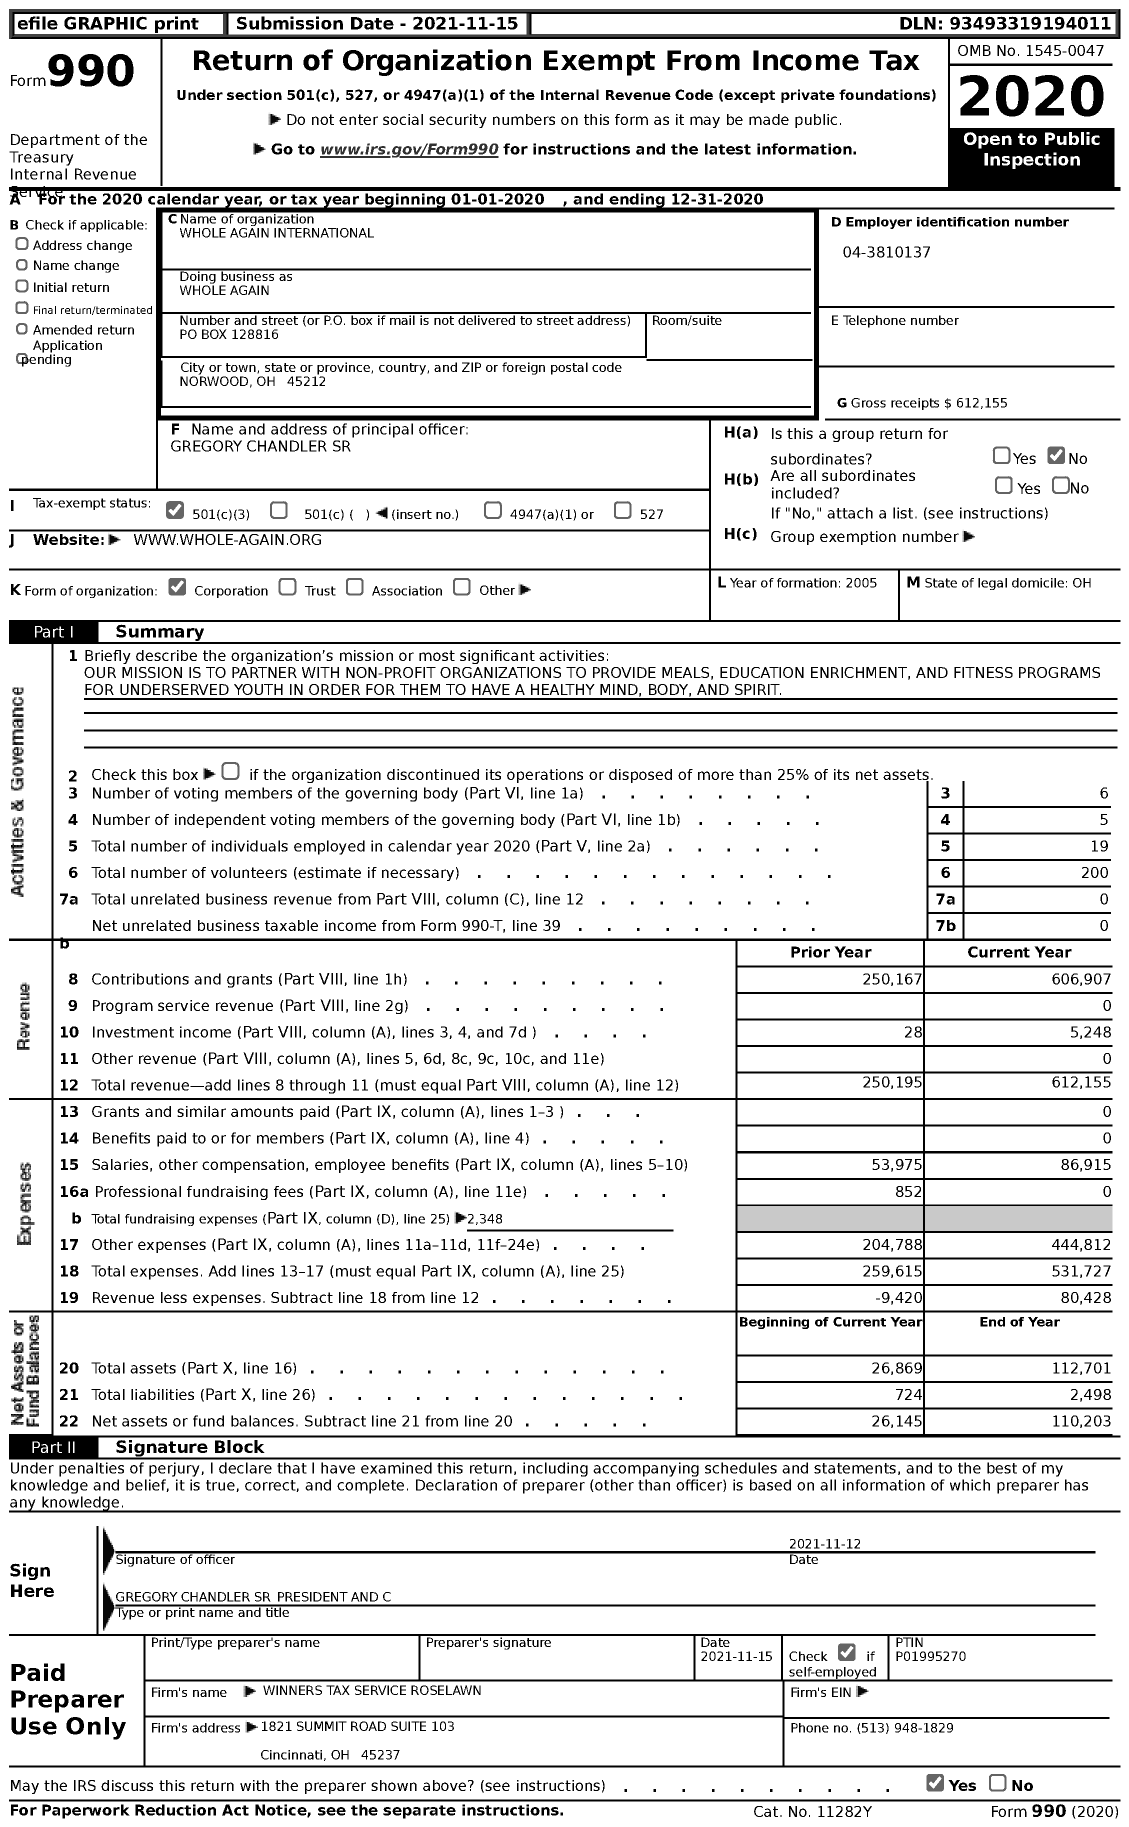 Image of first page of 2020 Form 990 for Whole Again